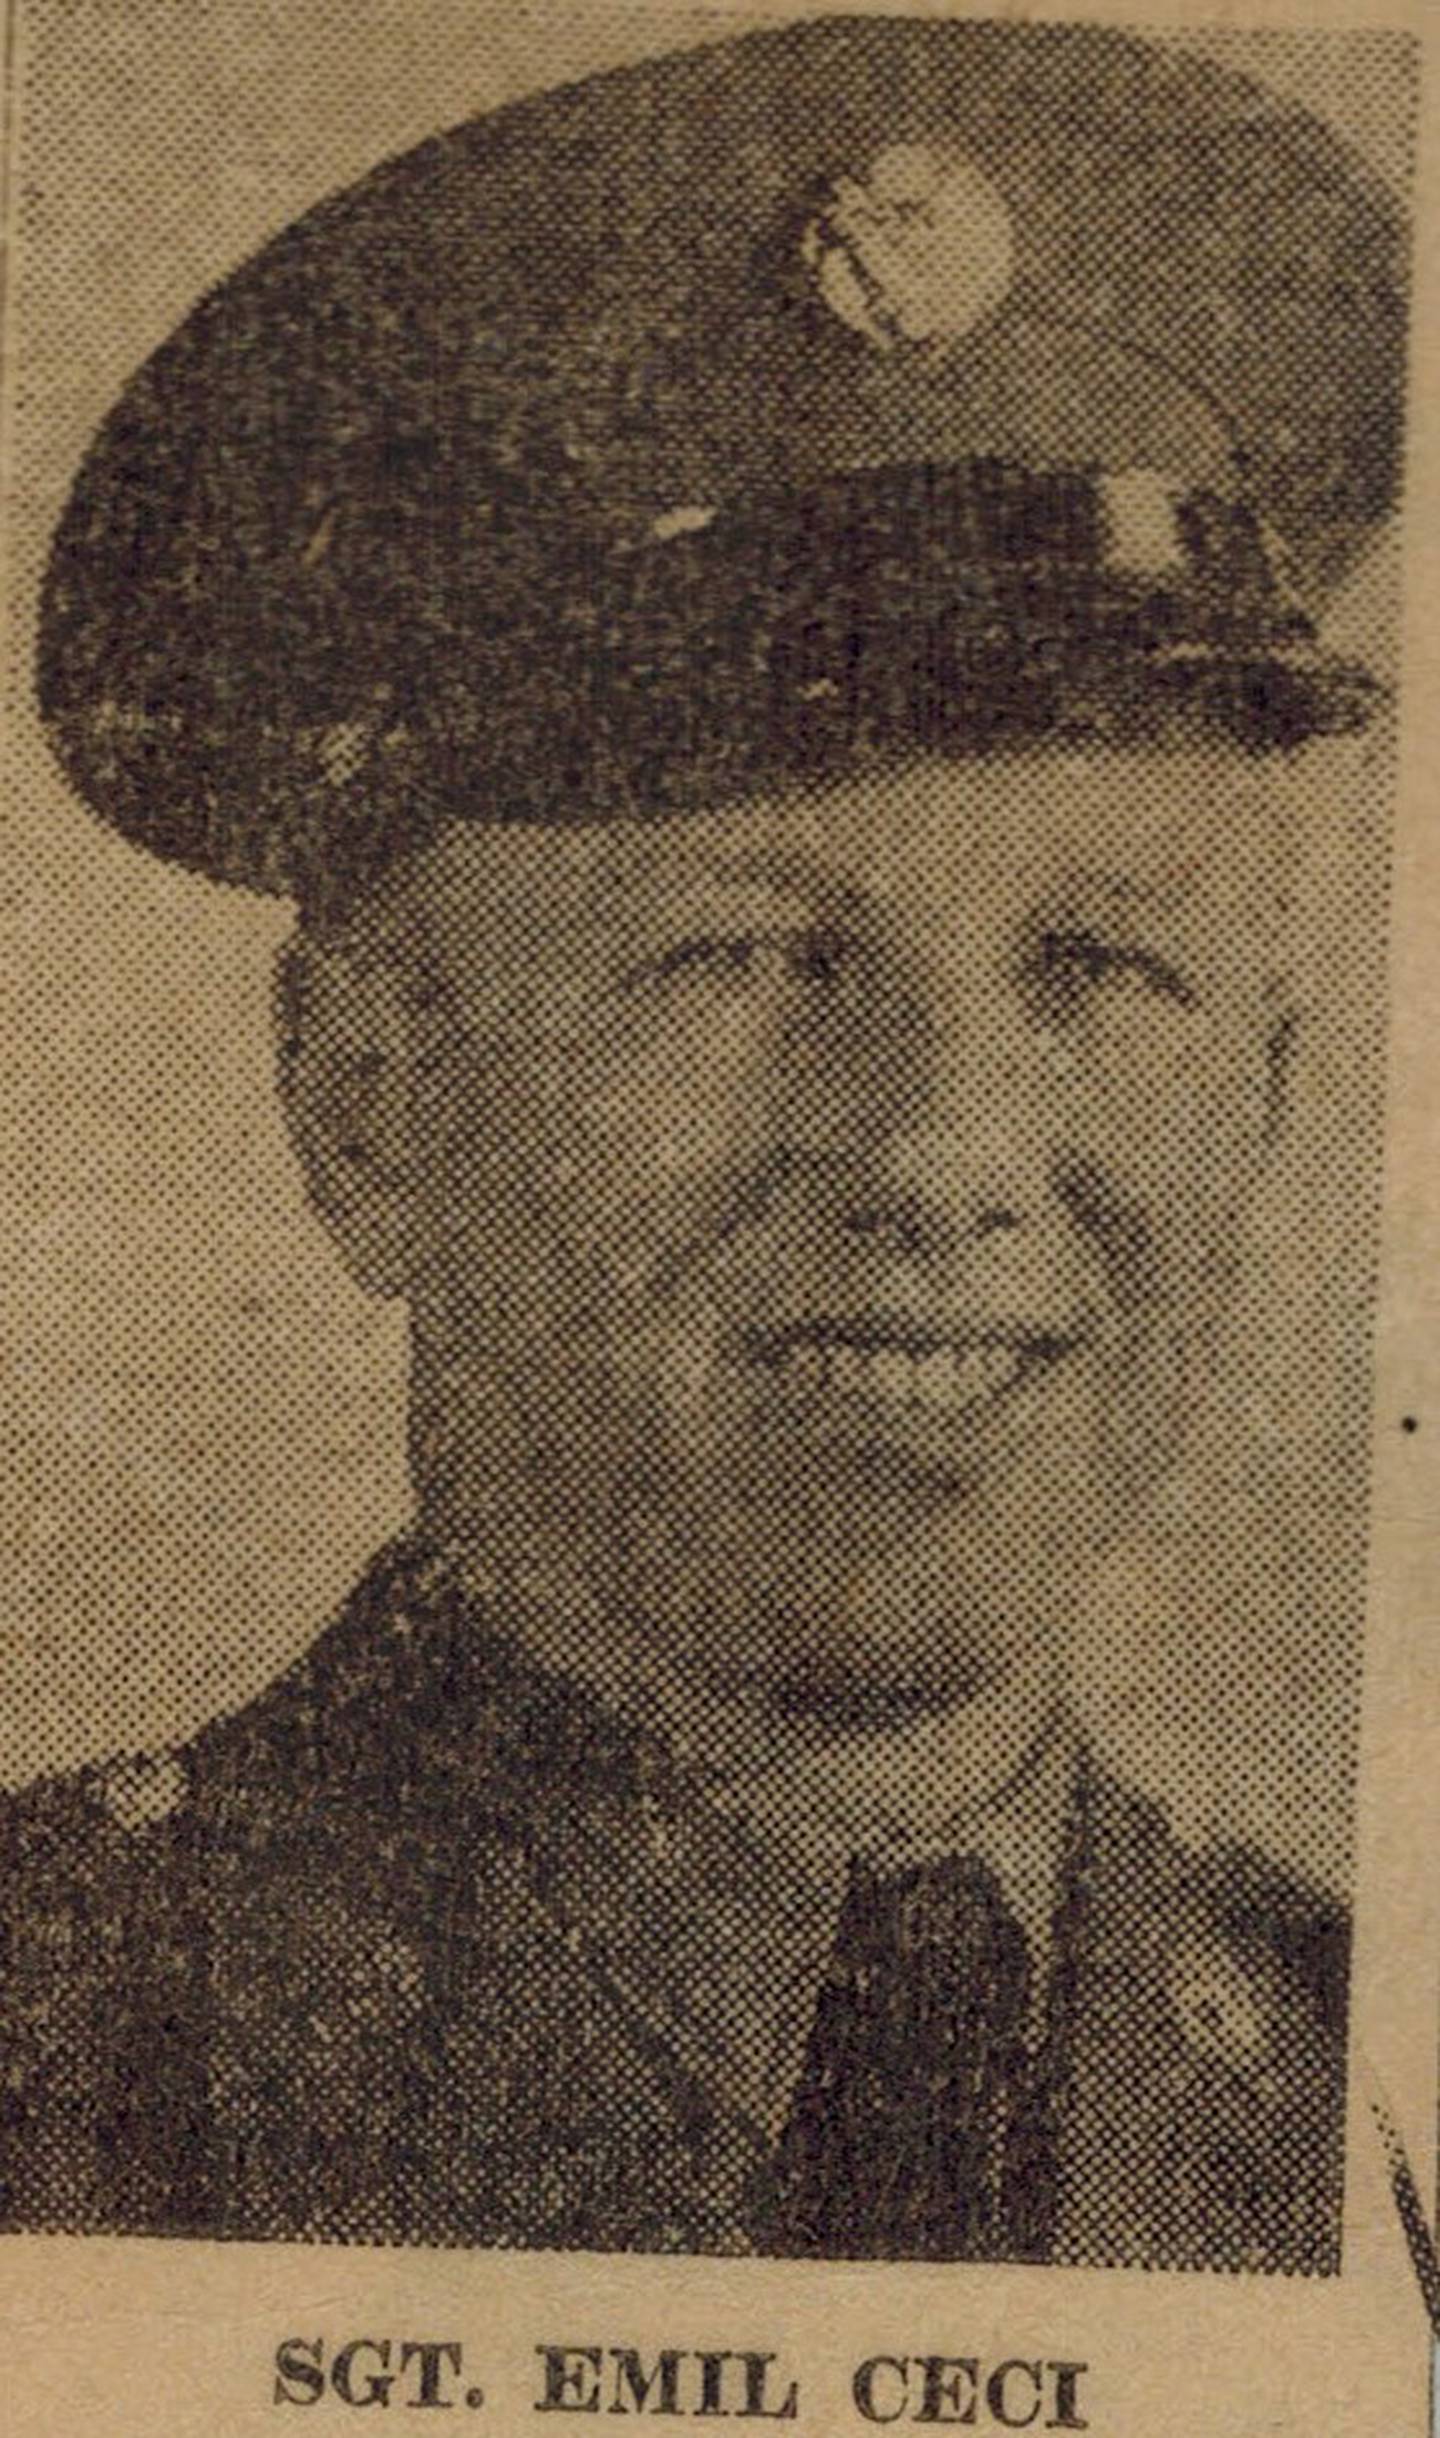 Emil Ceci was one of five brothers that served in the Army during World War II. This photo ran in The Herald-News with an announcement that he was killed in action, according to his nephew Robert Ceci of Joliet.